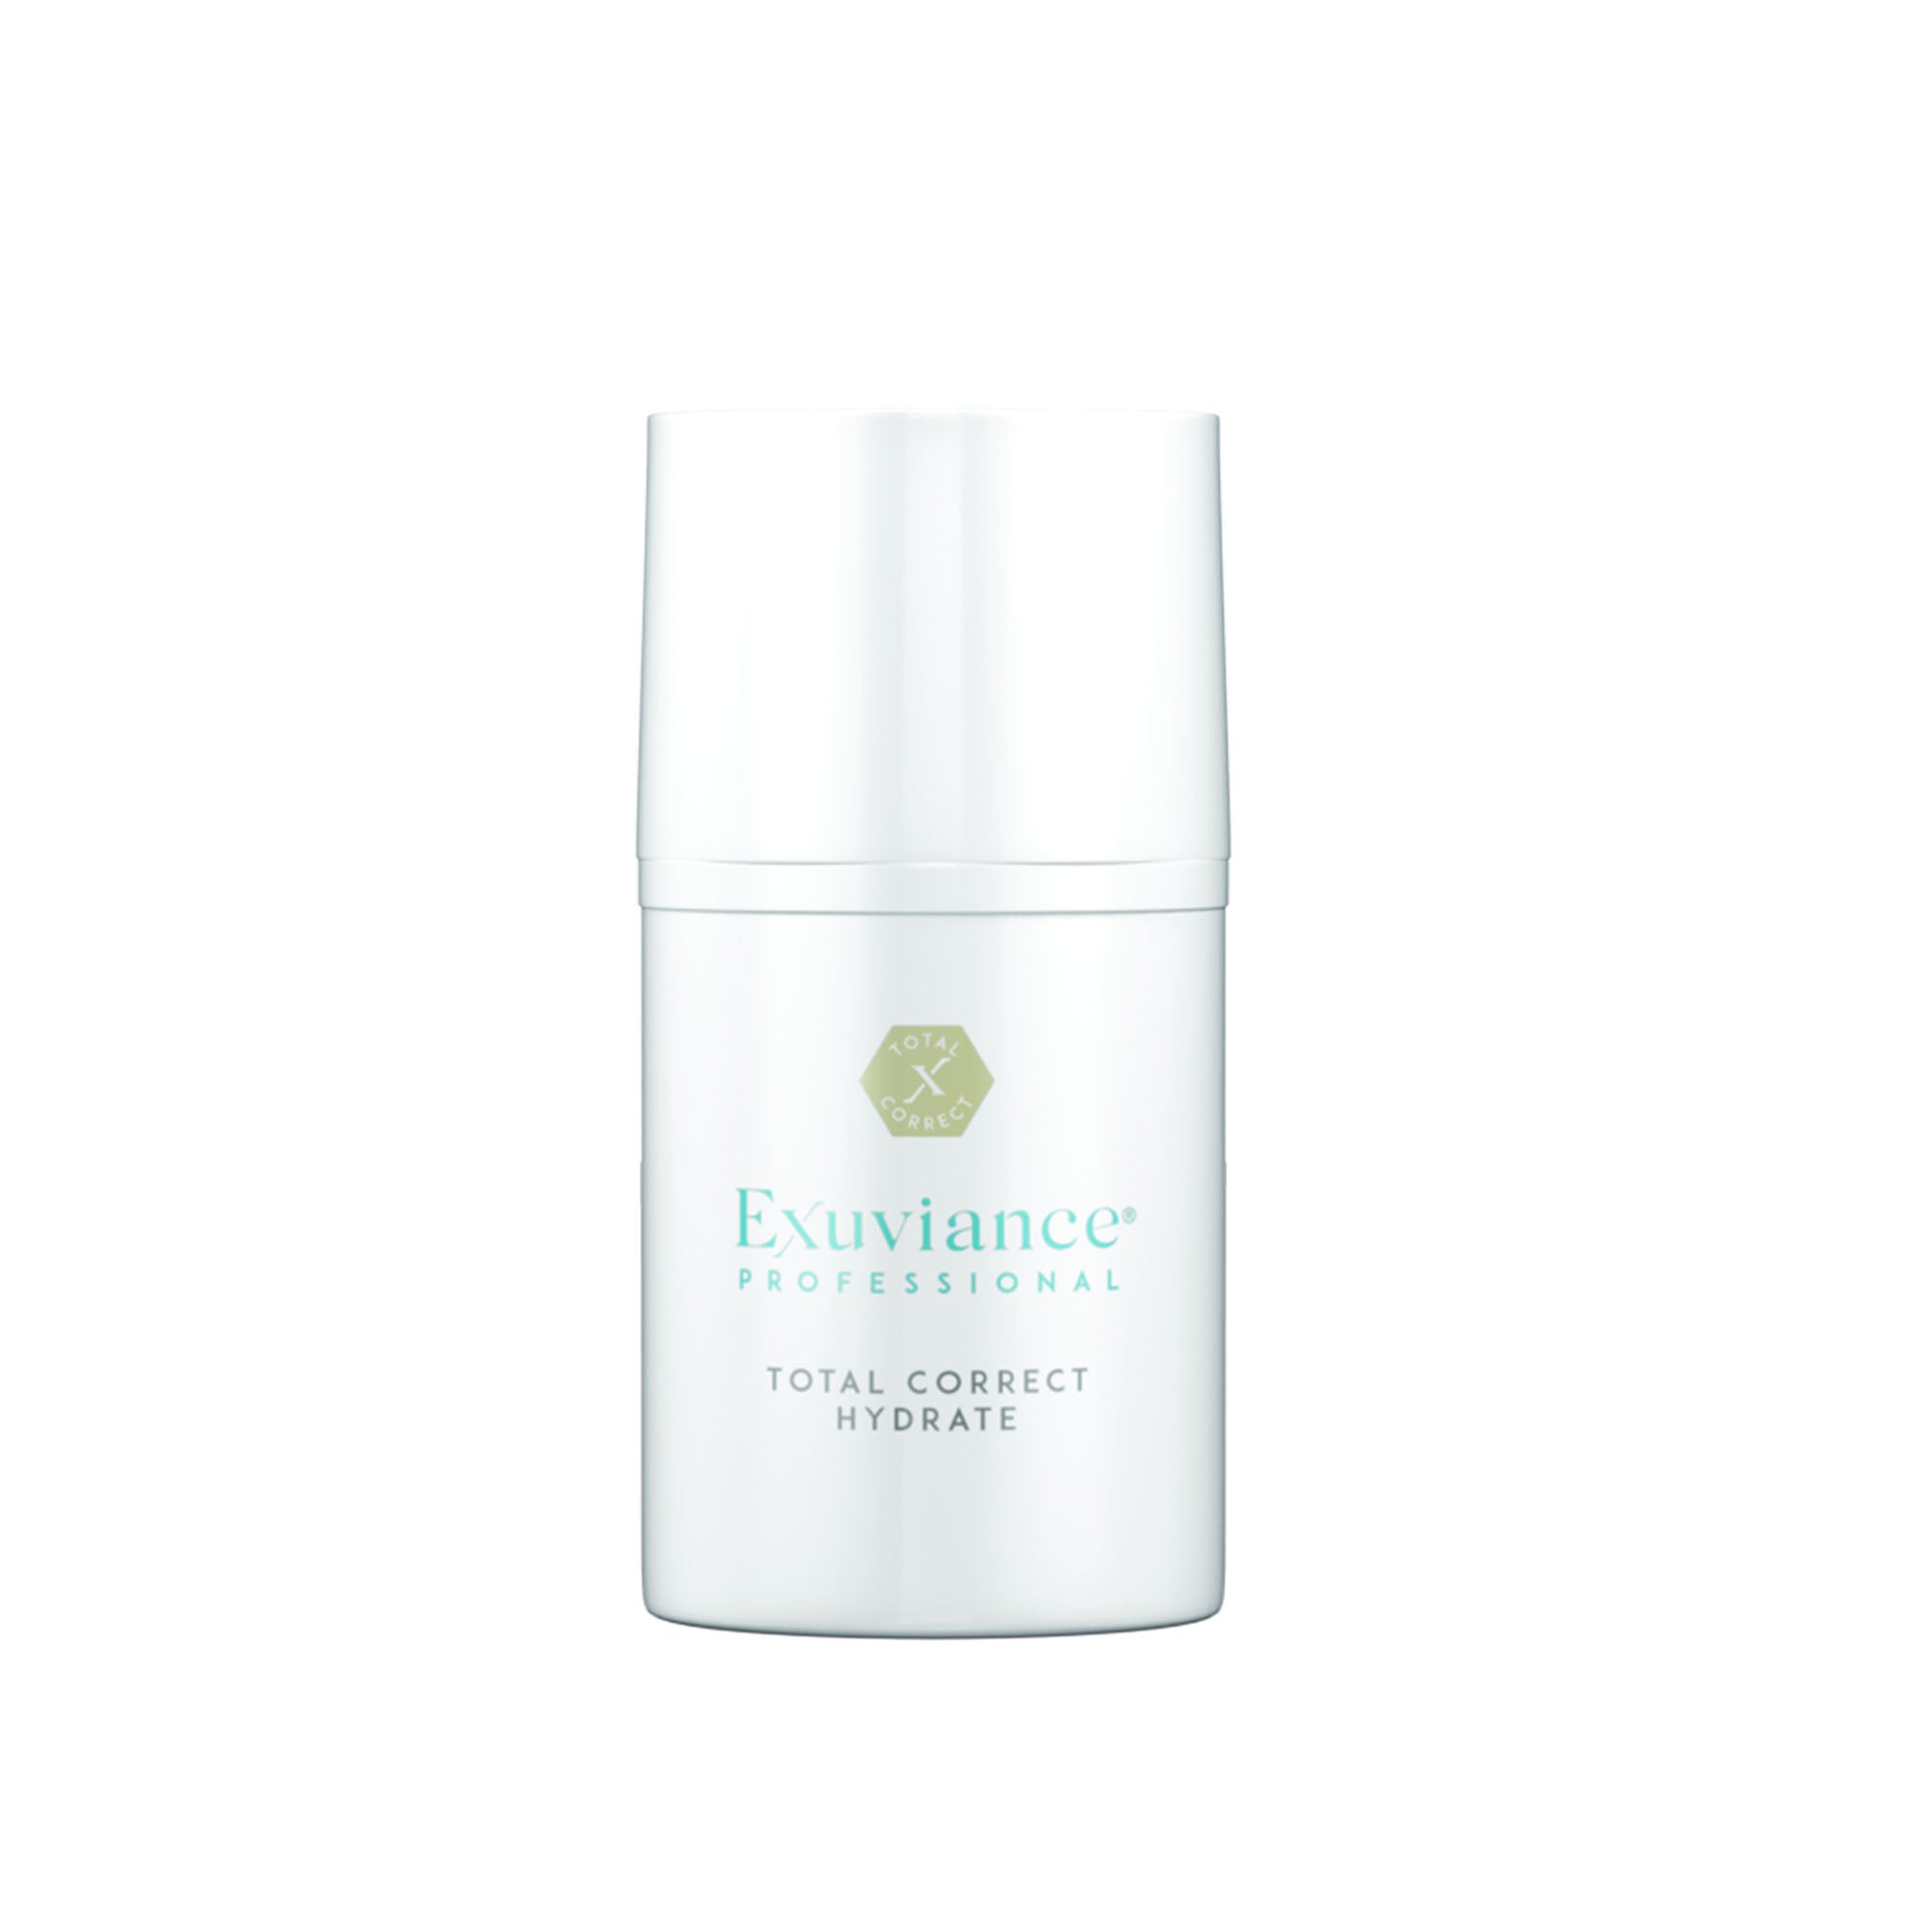 Exuviance Hydrate Firming Cream｜Total Correct Hydrate 50g